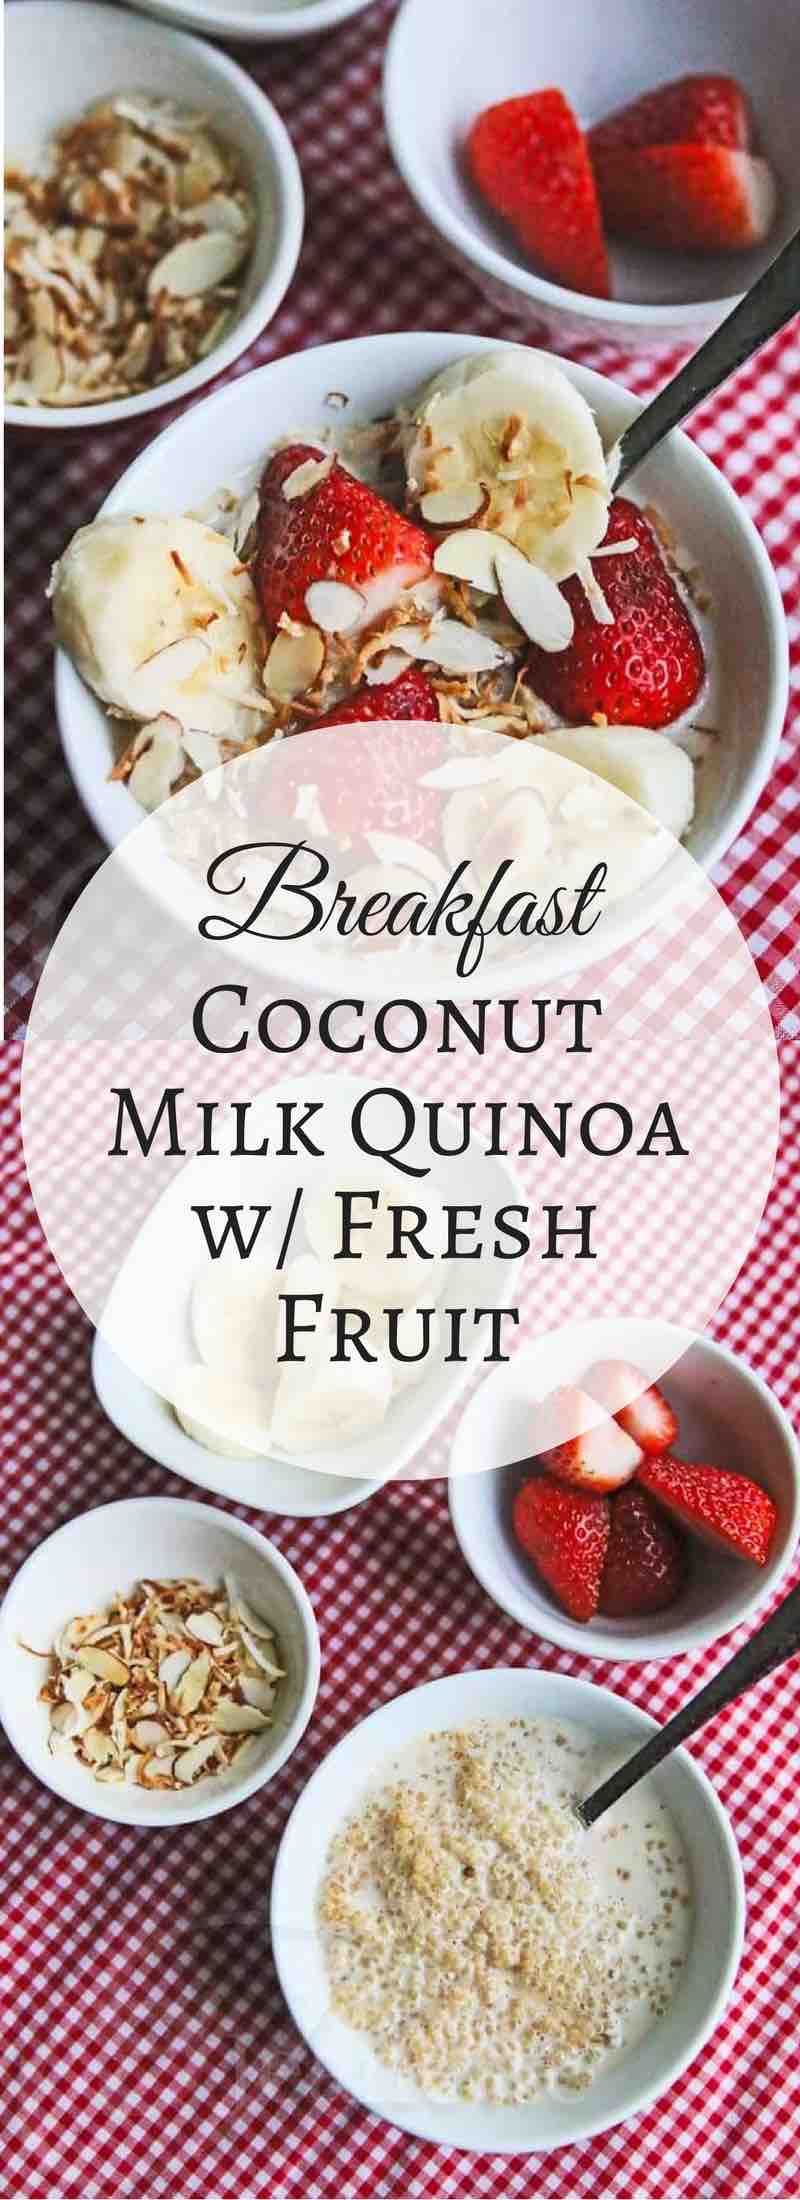 Breakfast Coconut Milk Quinoa with Fresh Fruit - this healthy hearty breakfast is the perfect way to start the day